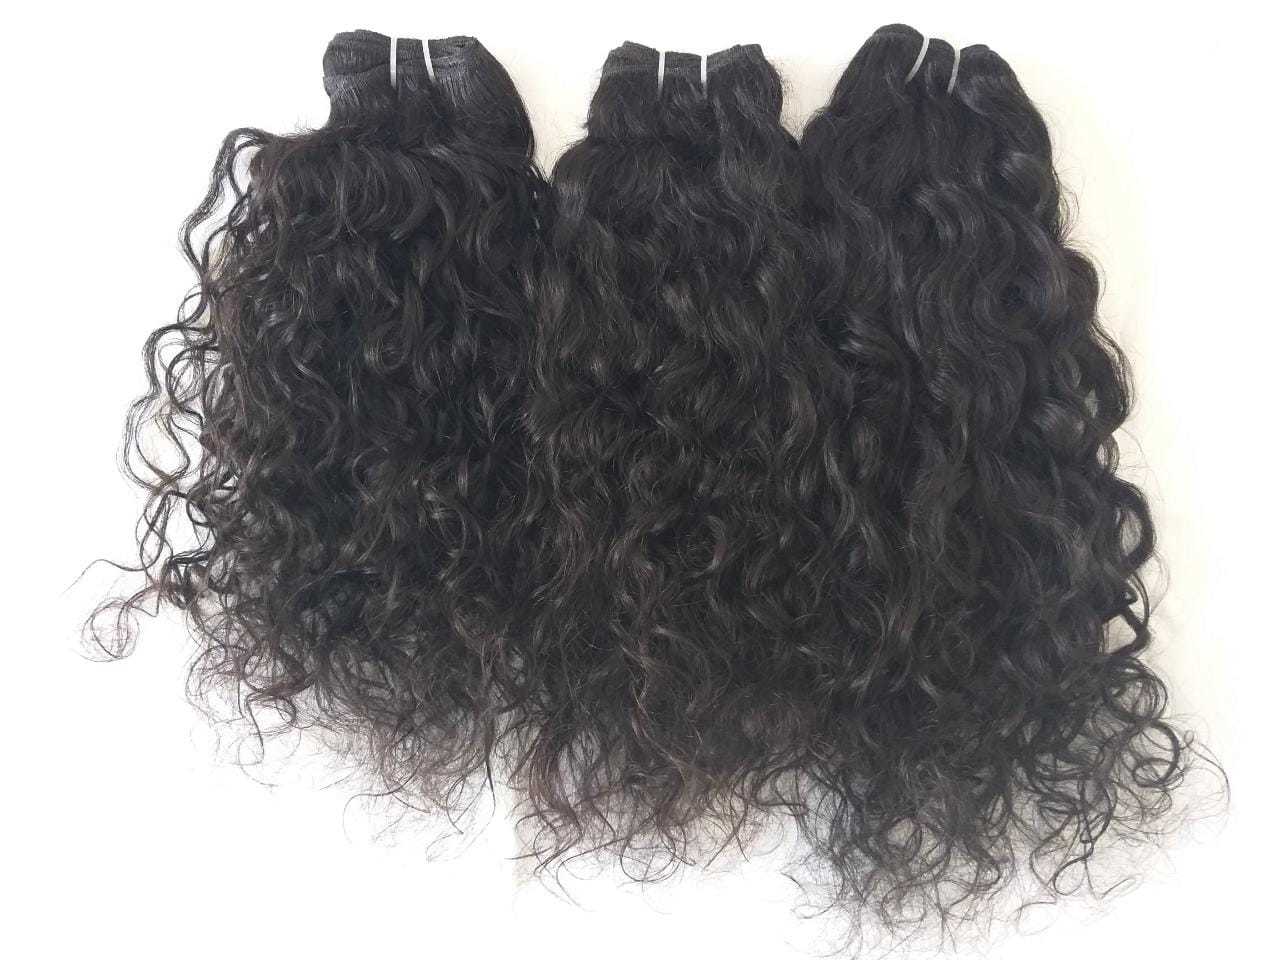 Raw Unprocessed Natural Curly Hair, Deep Curly Cuticle Aligned